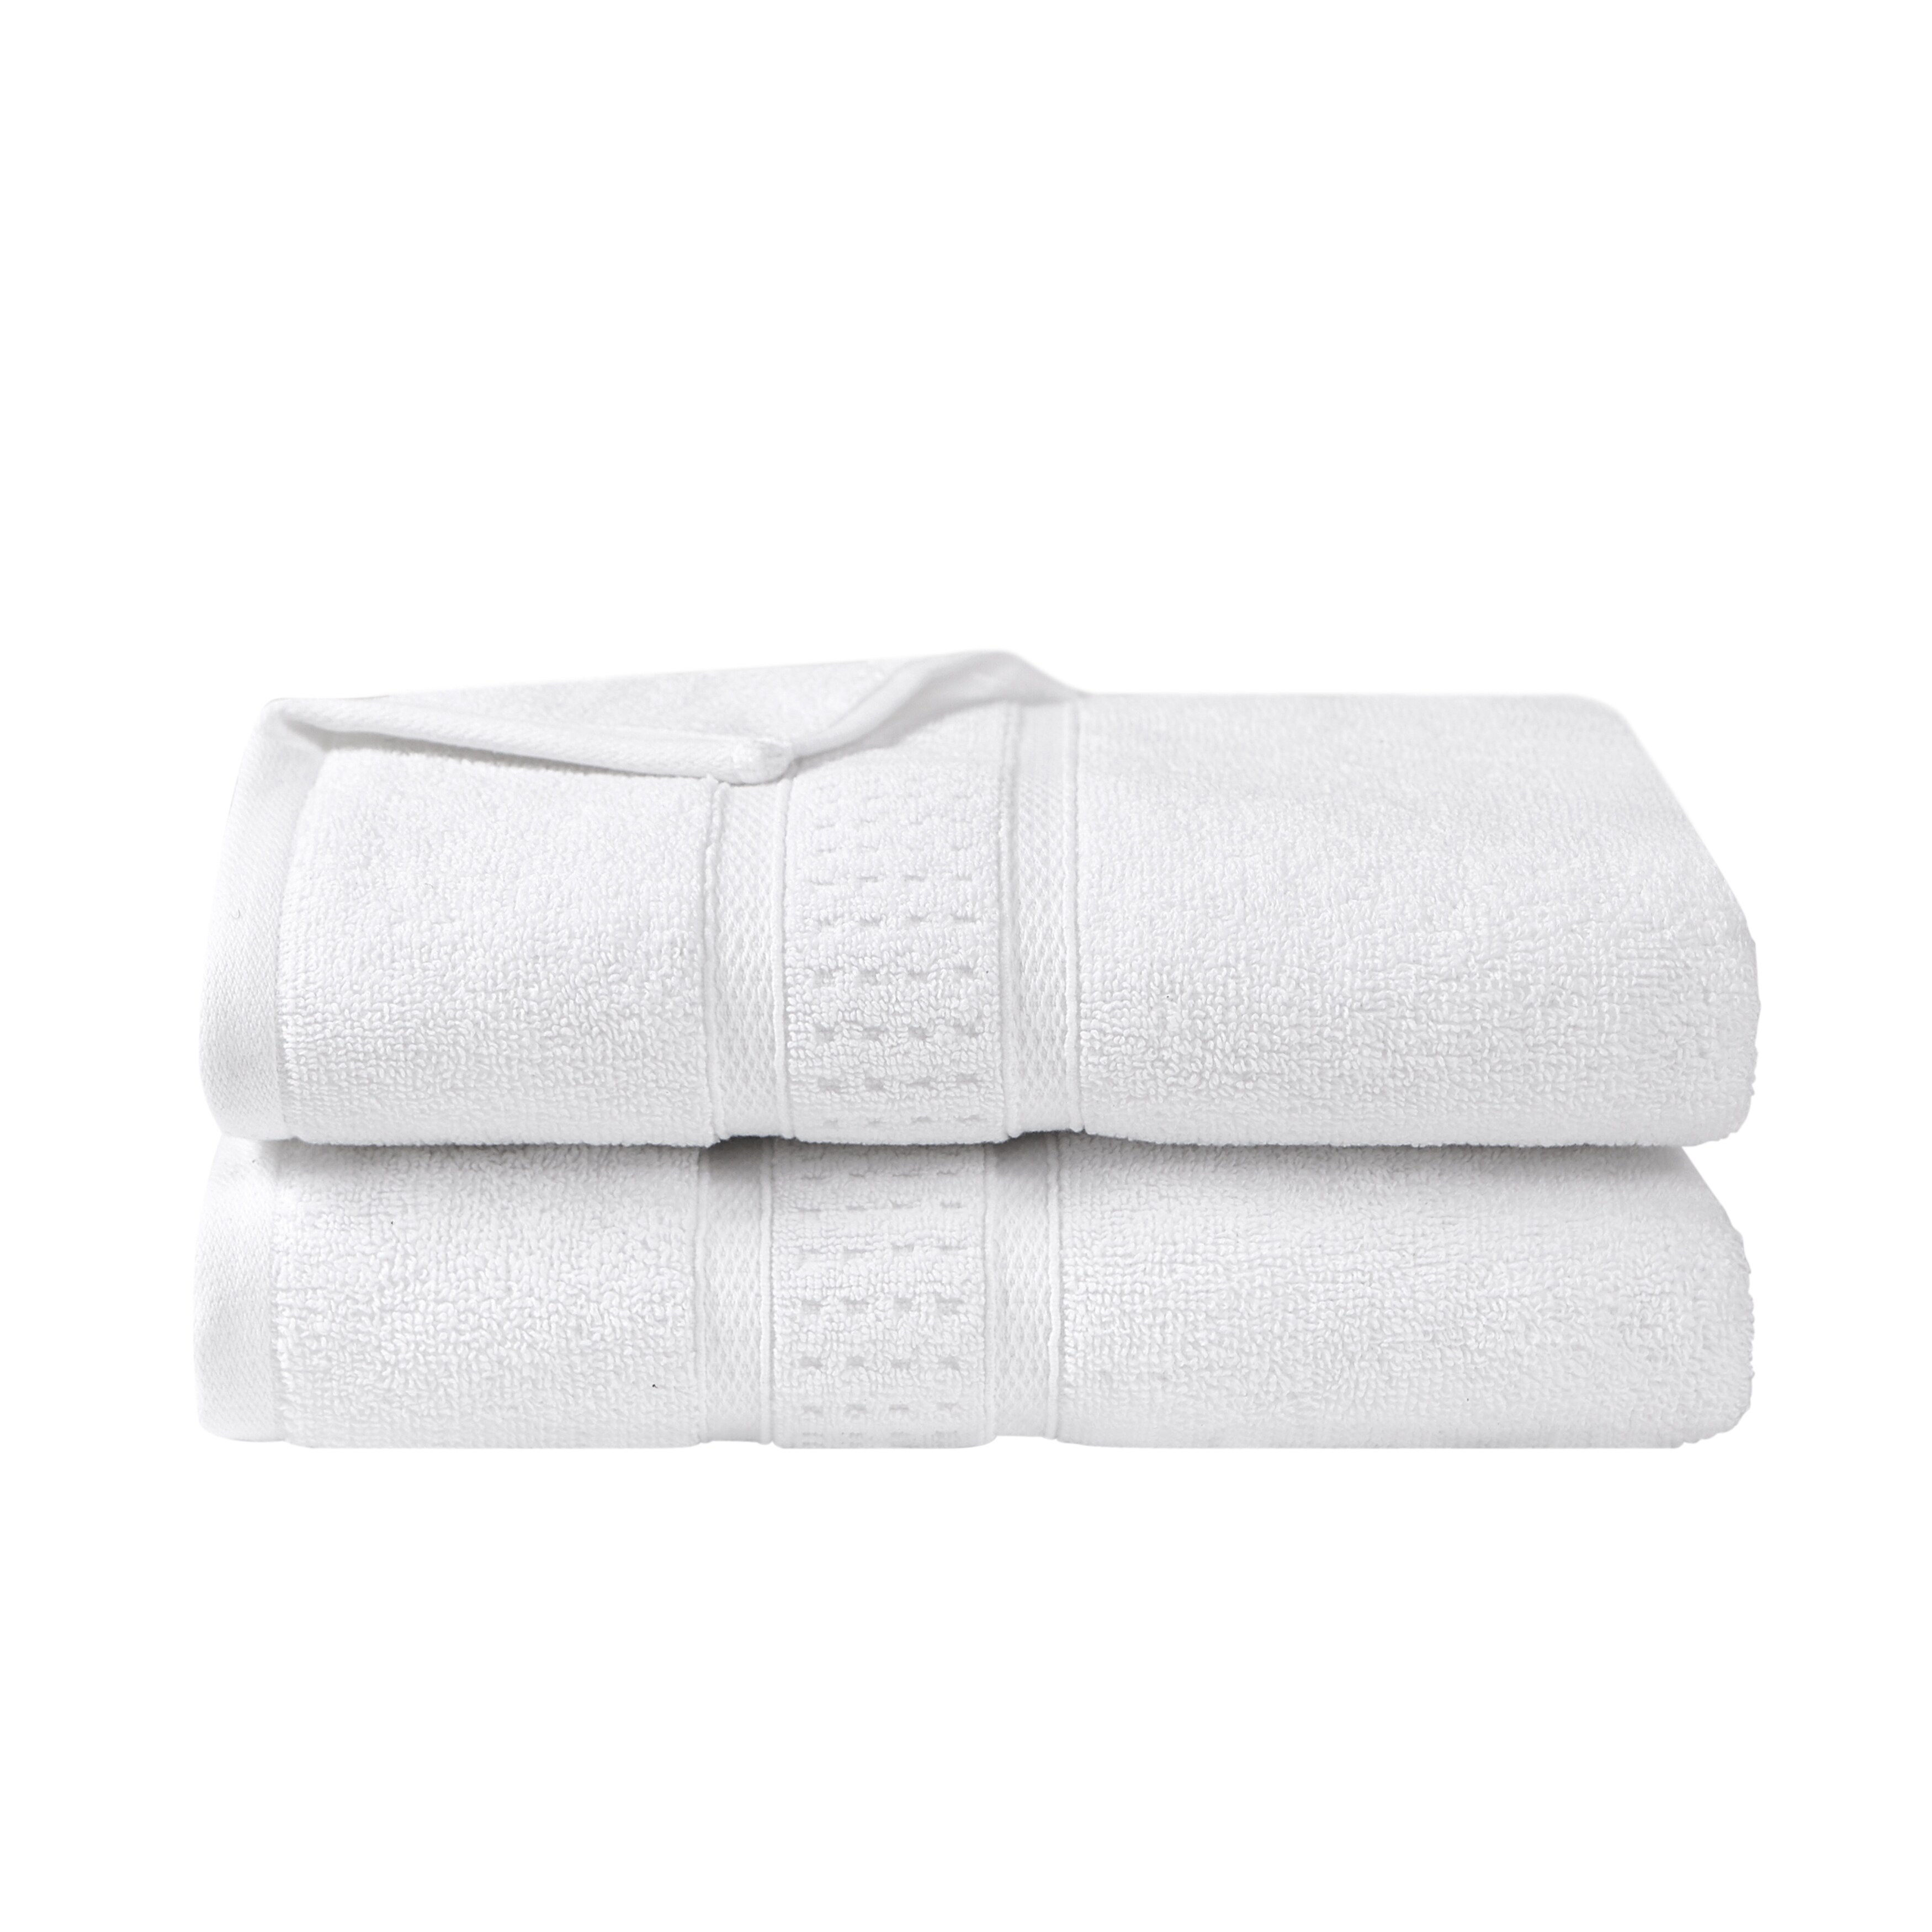 https://ak1.ostkcdn.com/images/products/is/images/direct/c65881fe12d280fa5950db8f7663dd23ae80f091/Nautica-Oceane-Solid-Wellness-Towel-Collection.jpg